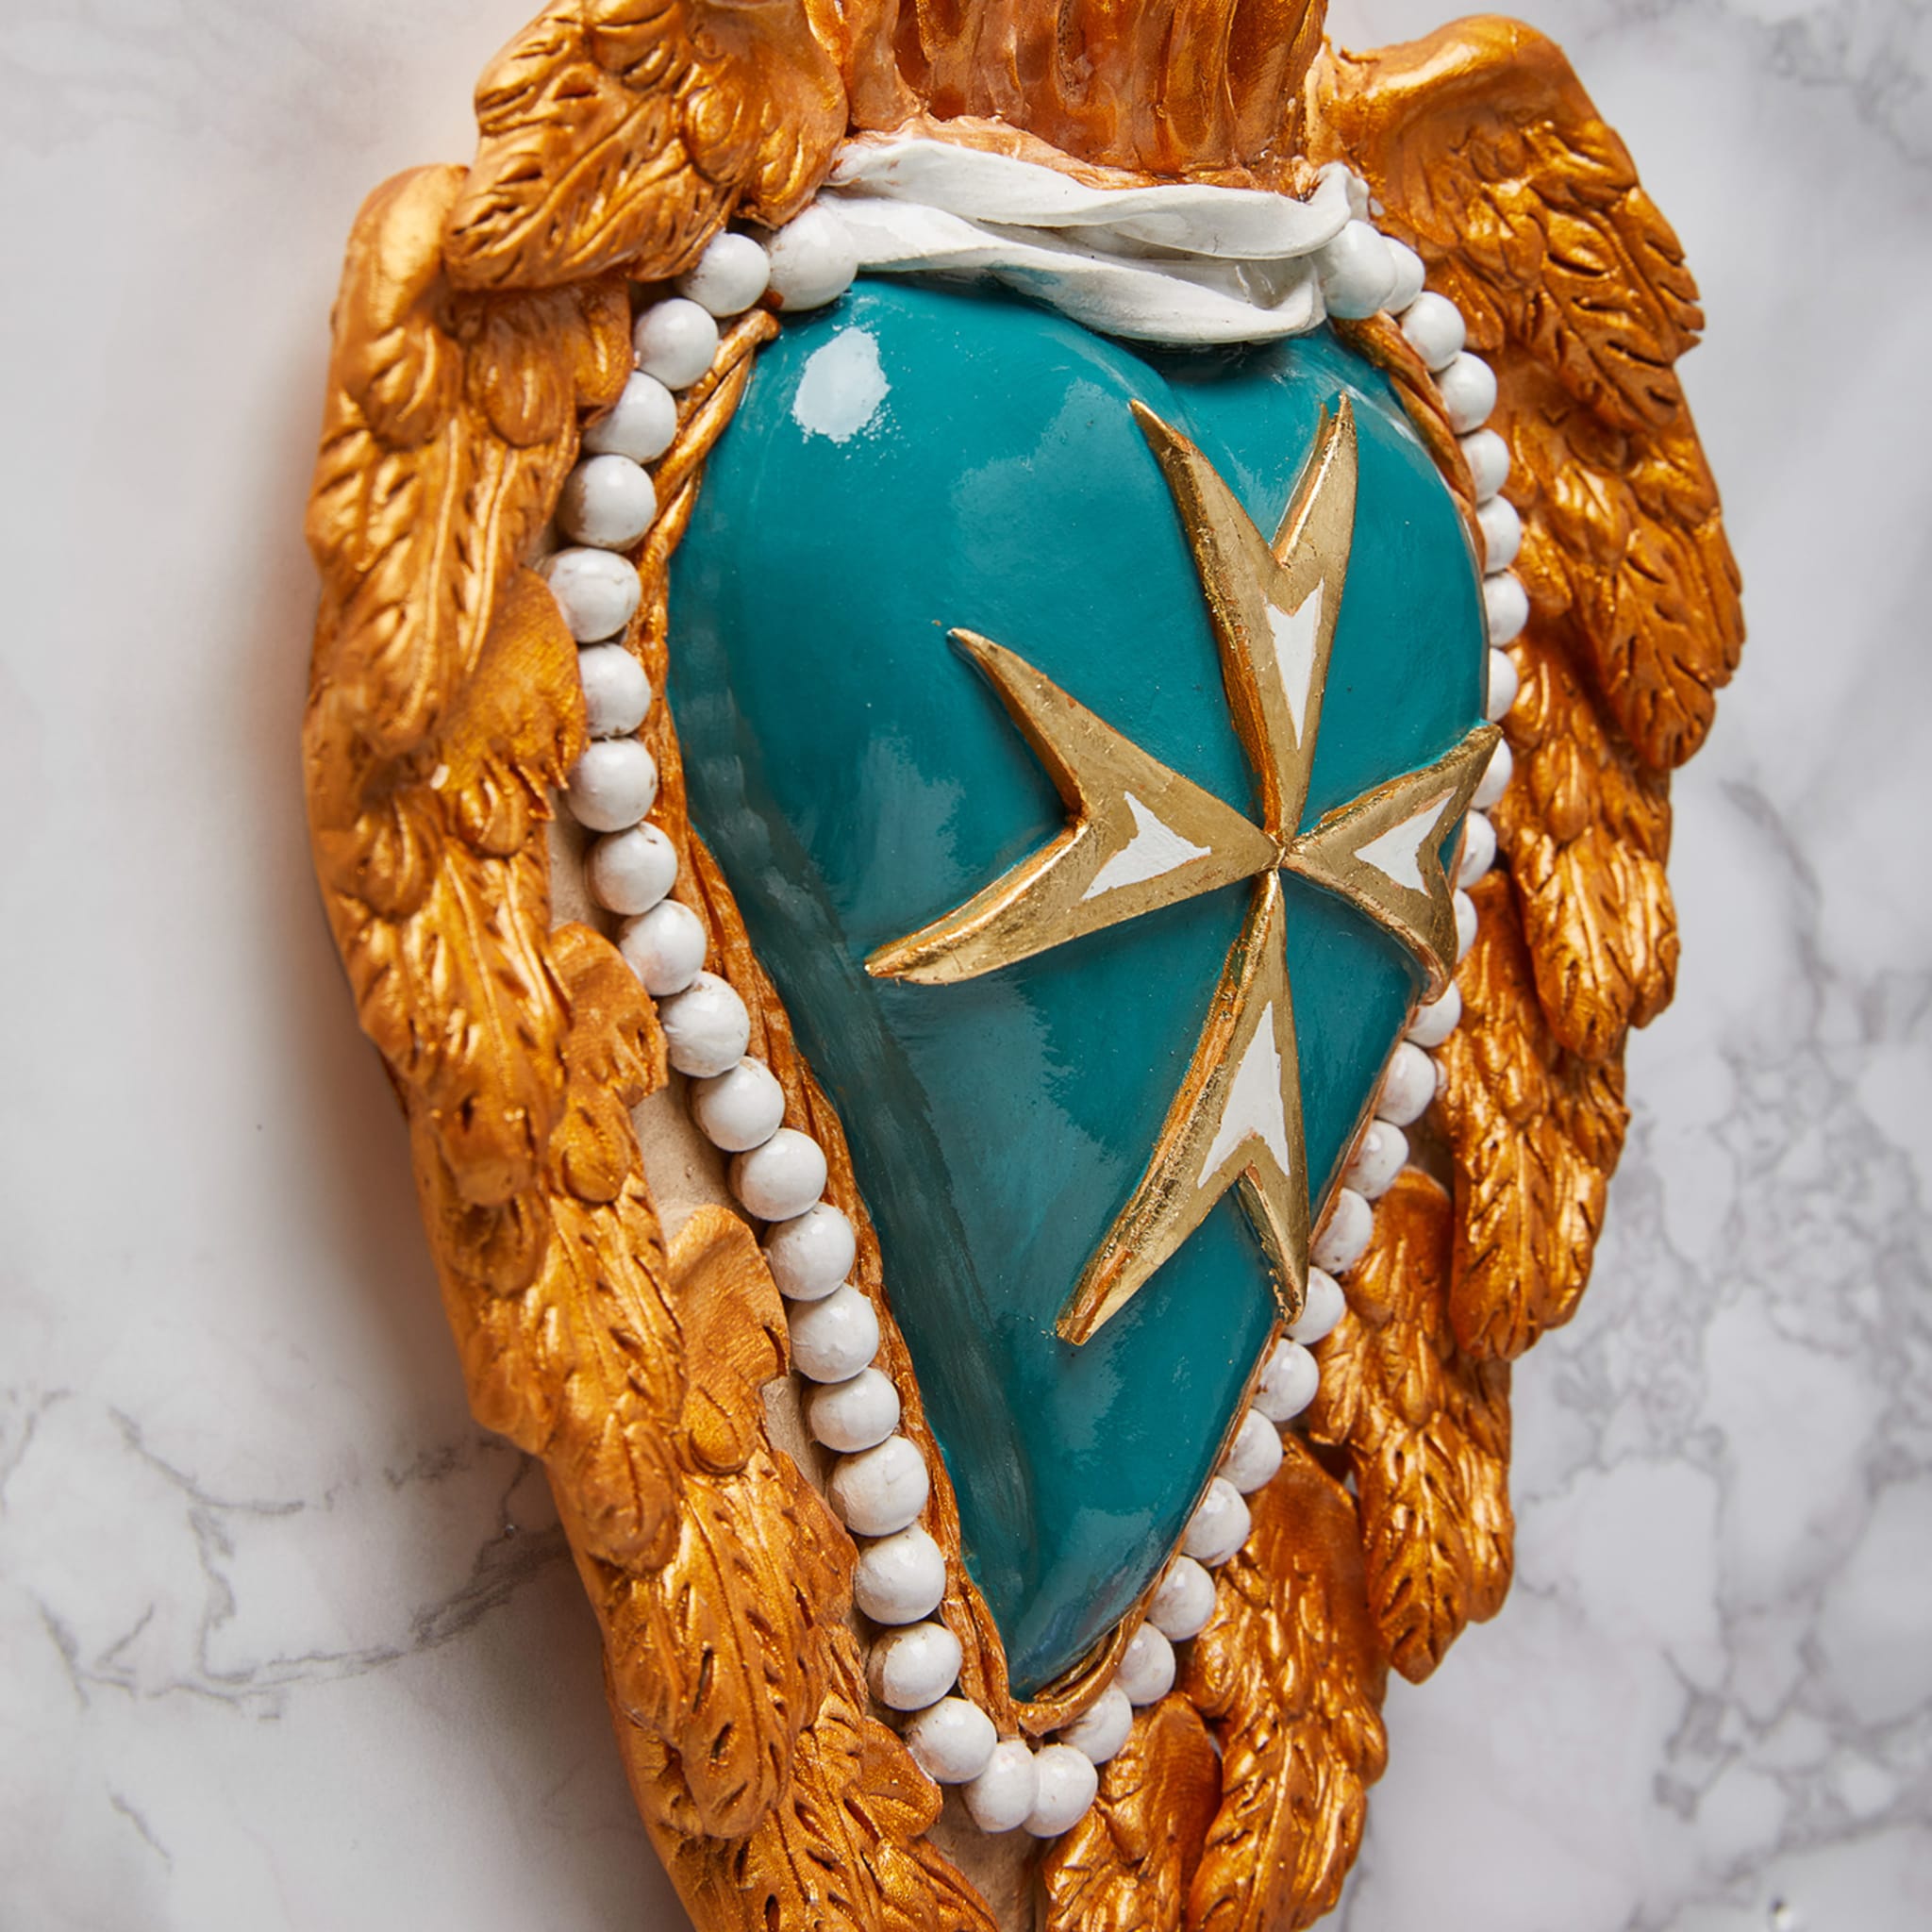 CROSS MY HEART TURQUOISE AND GOLD CERAMIC HEART - Alternative view 2